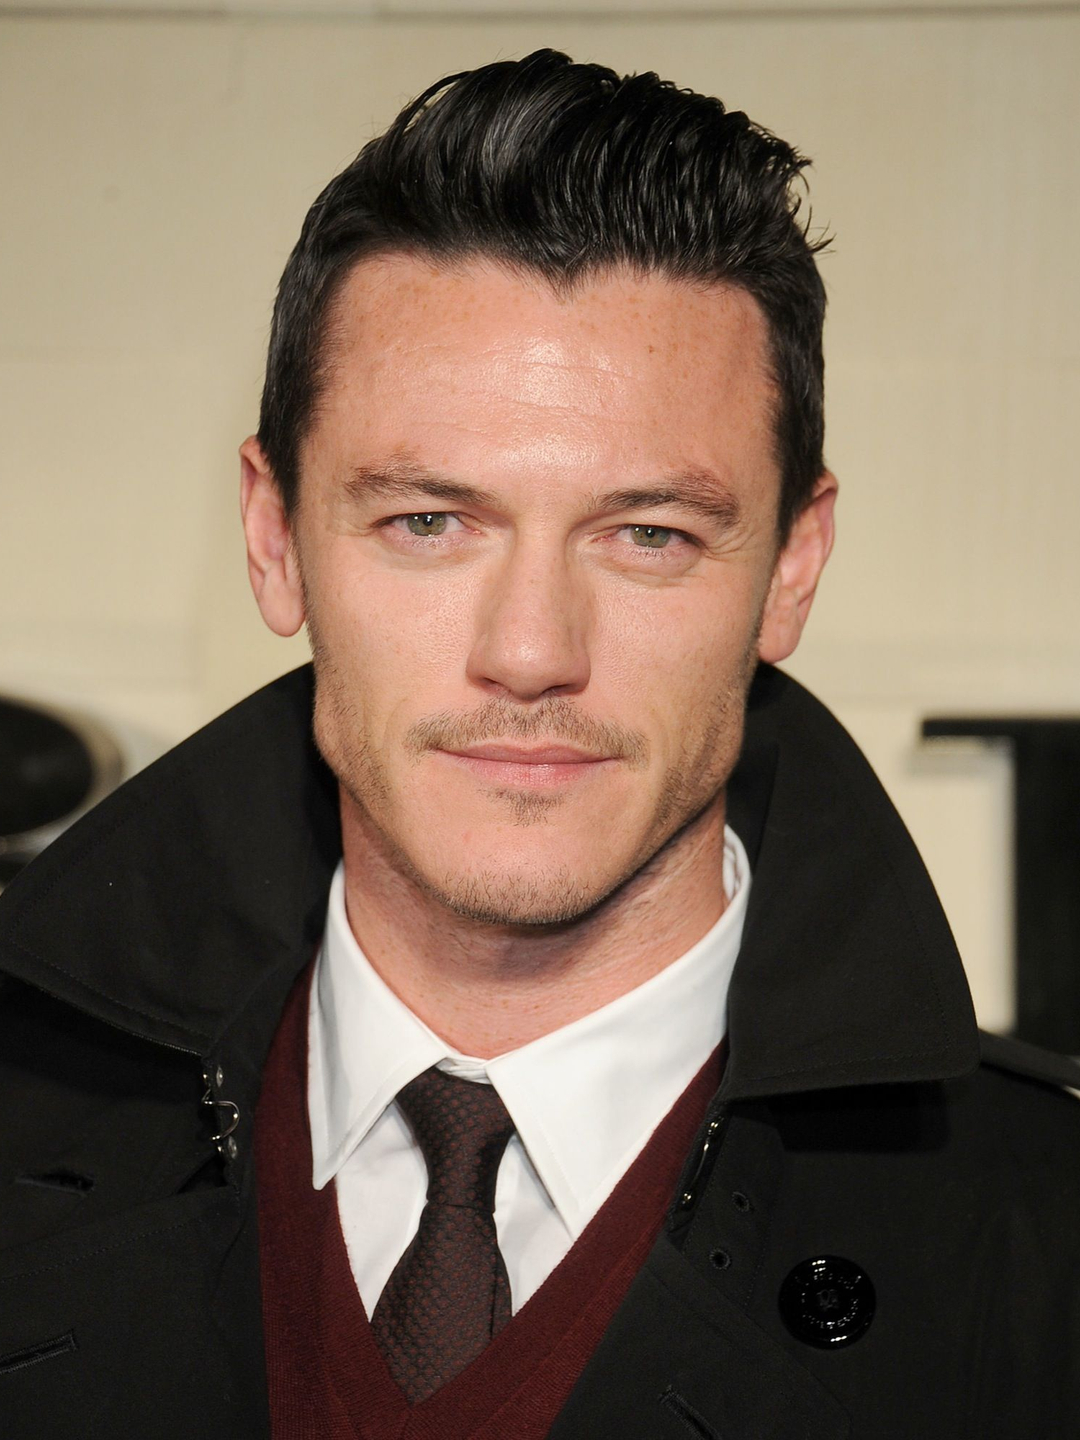 Luke Evans who is his mother